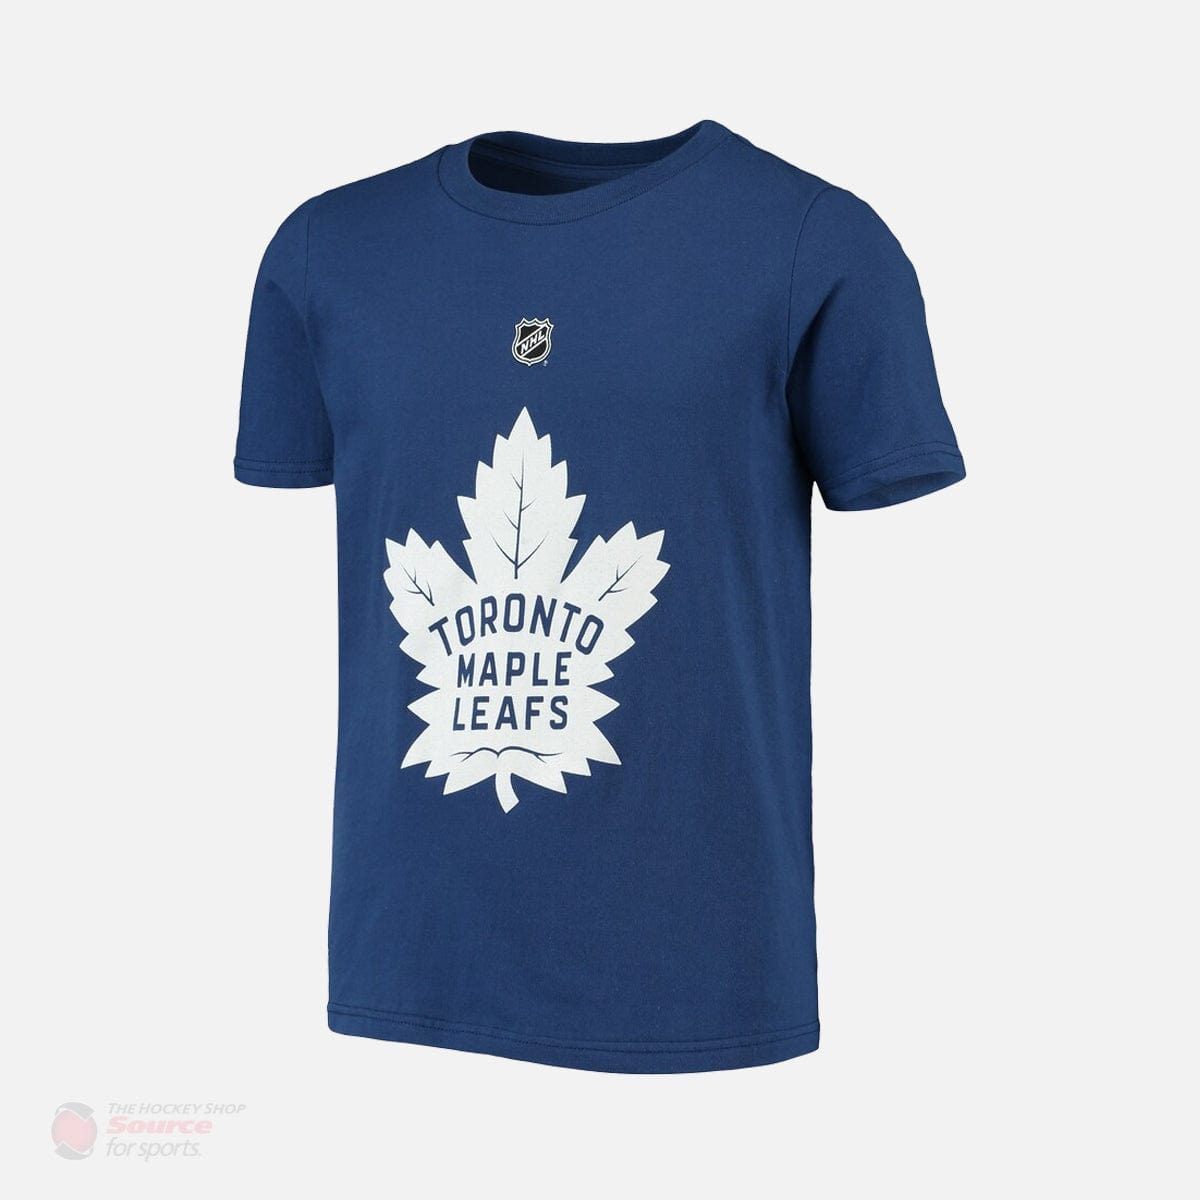 Toronto Maple Leafs Outer Stuff Name & Number Youth Shirt - Mitch Marner